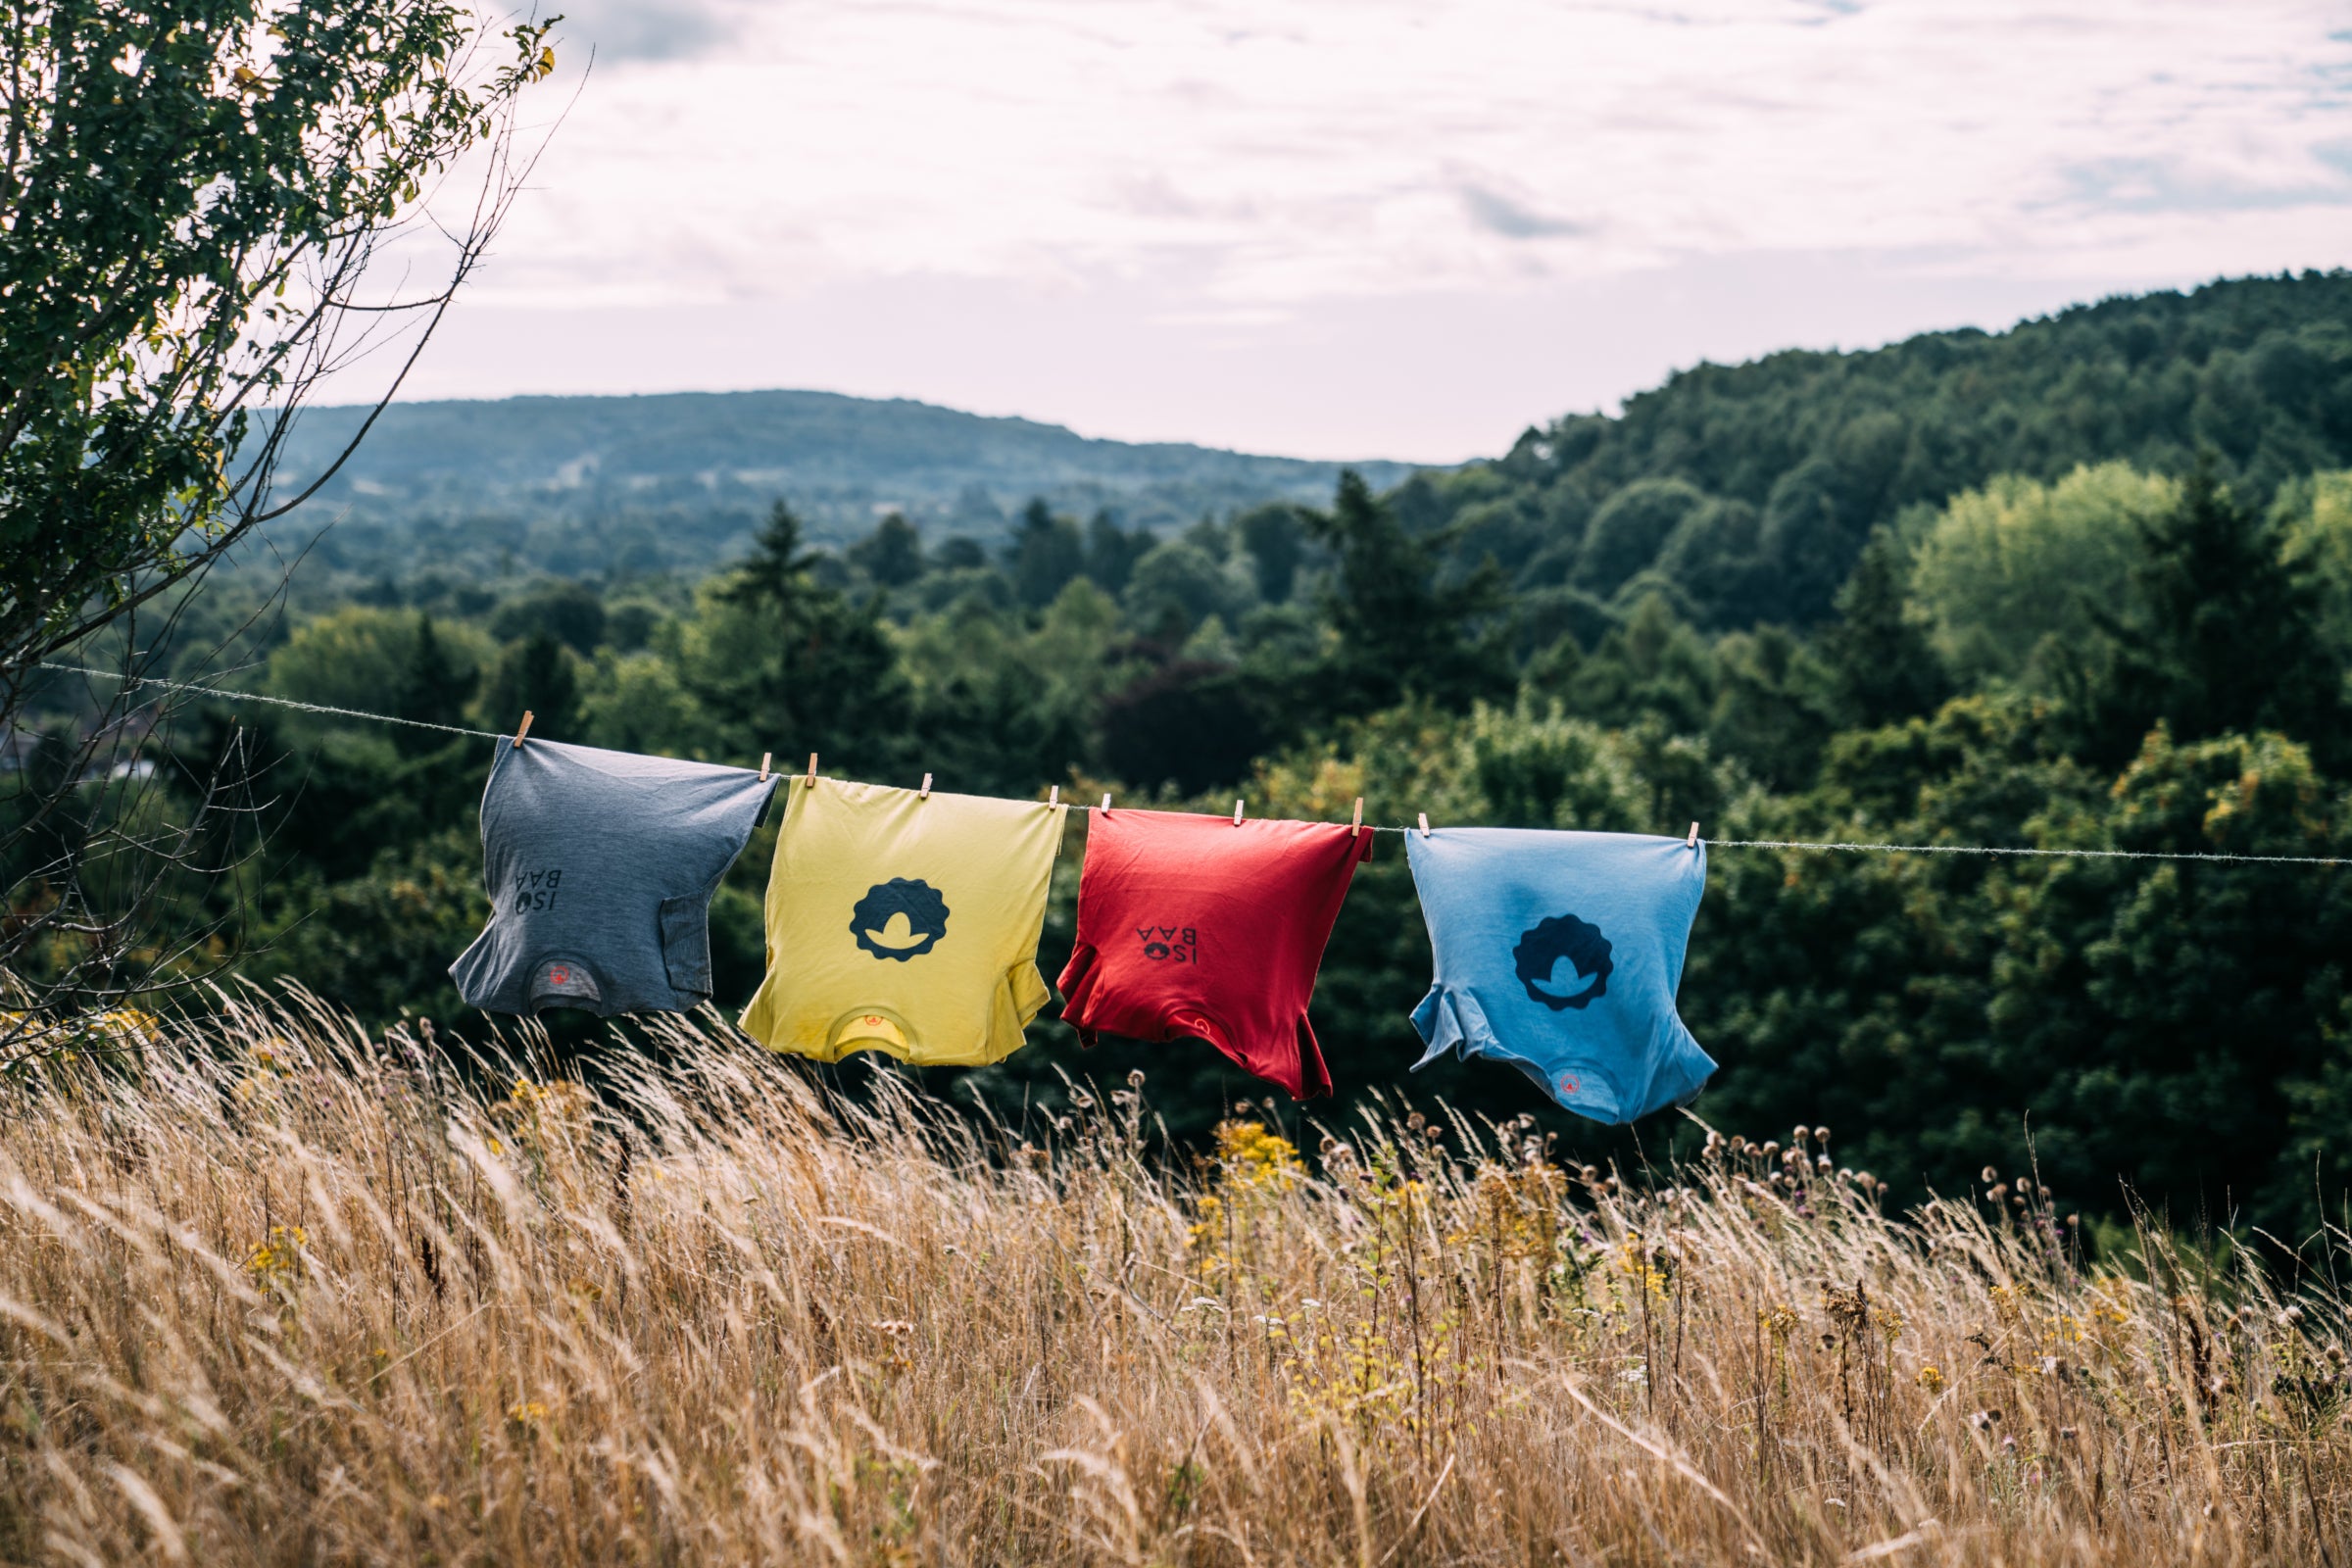 Four colorful Merino Wool T-shirts with printed Isobaa logos hanging on a clothesline in a sunny field with a backdrop of trees and hills.